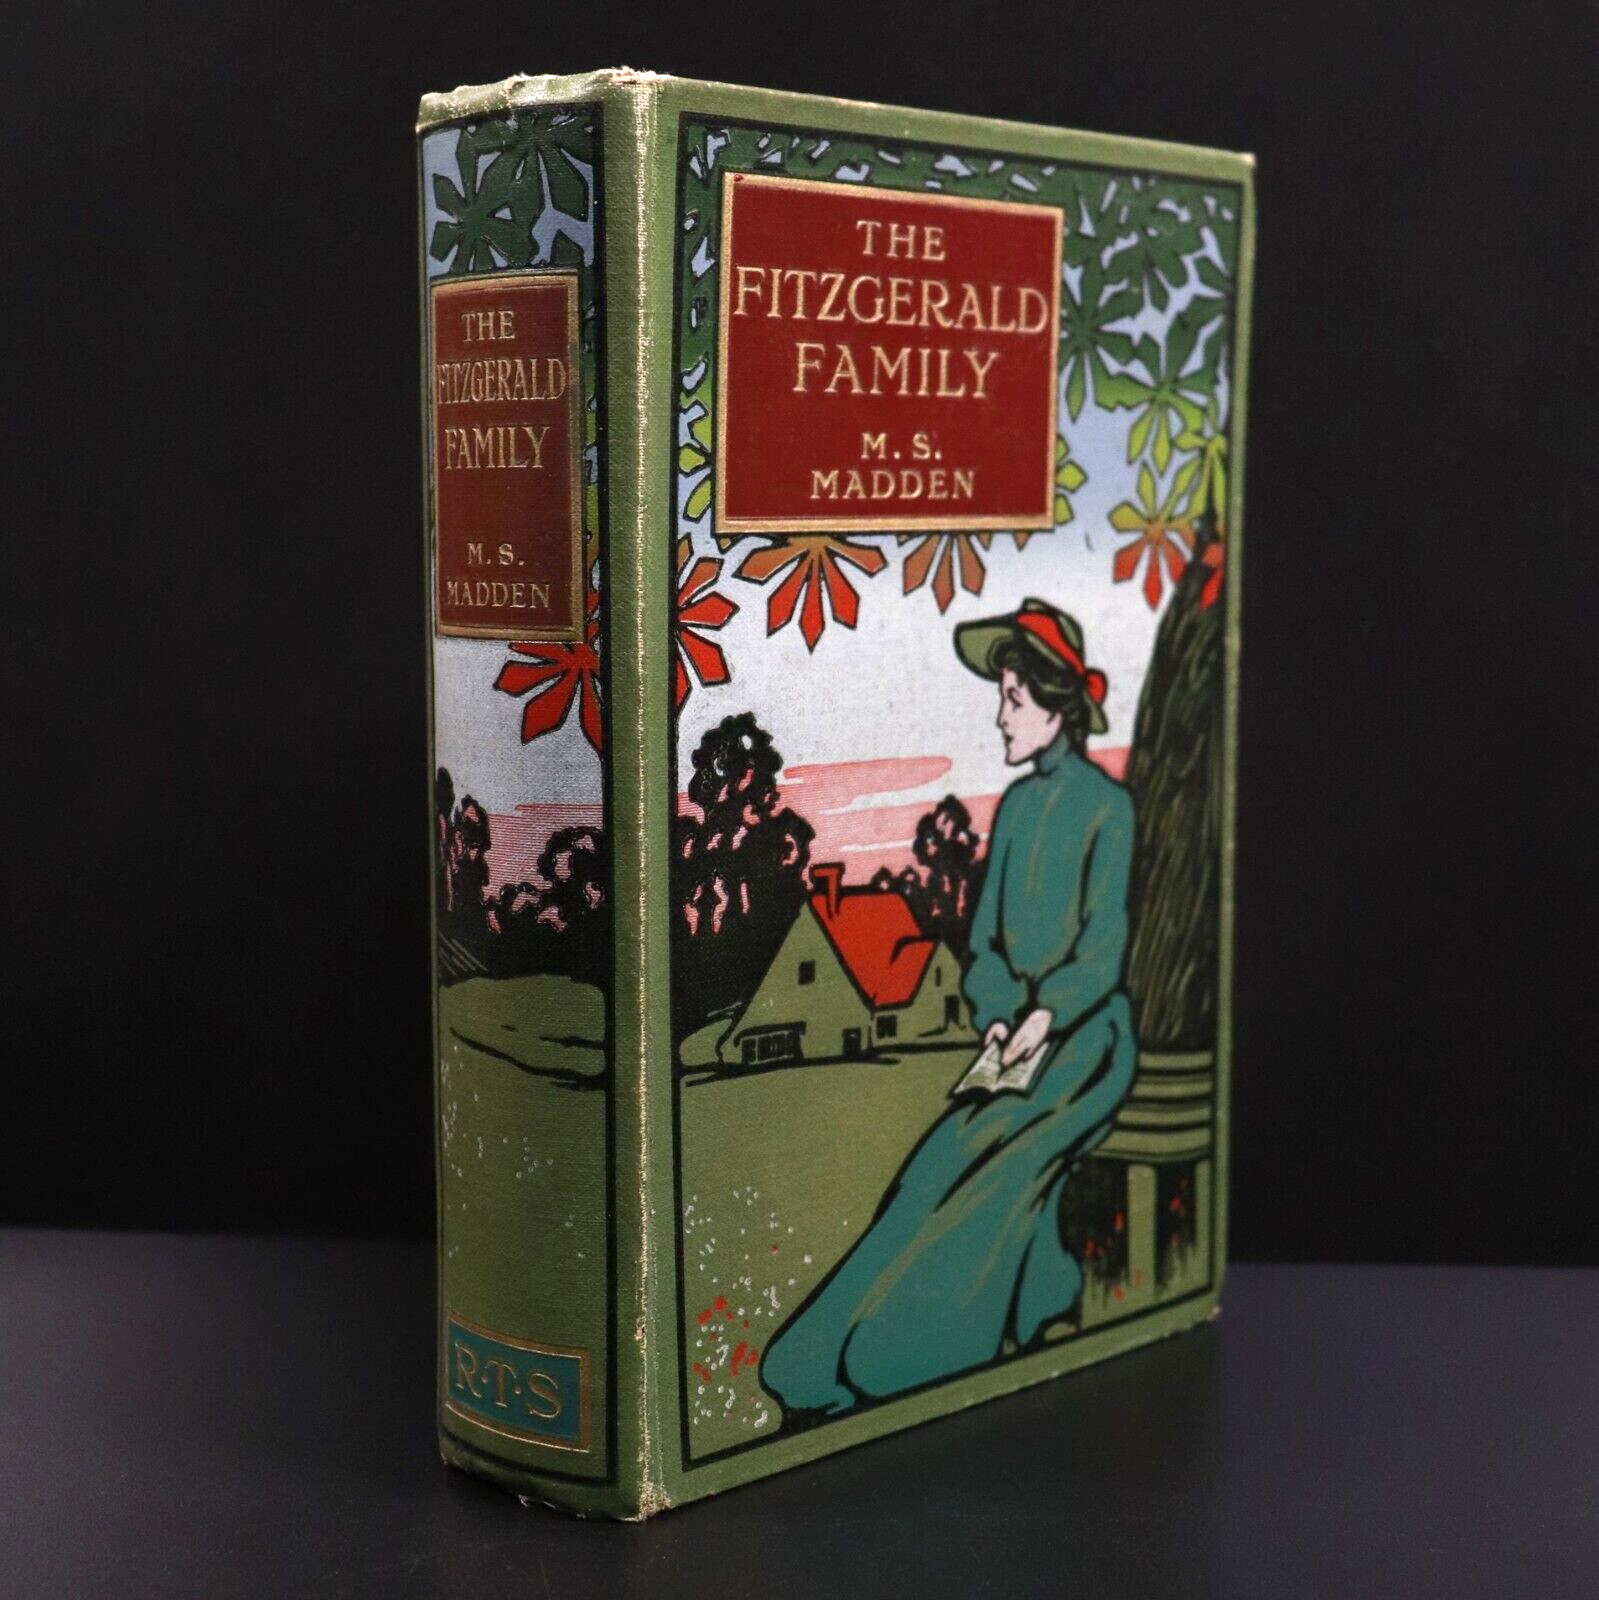 c1900 The Fitzgerald Family by M.S. Madden Antique British Fiction Book RTS